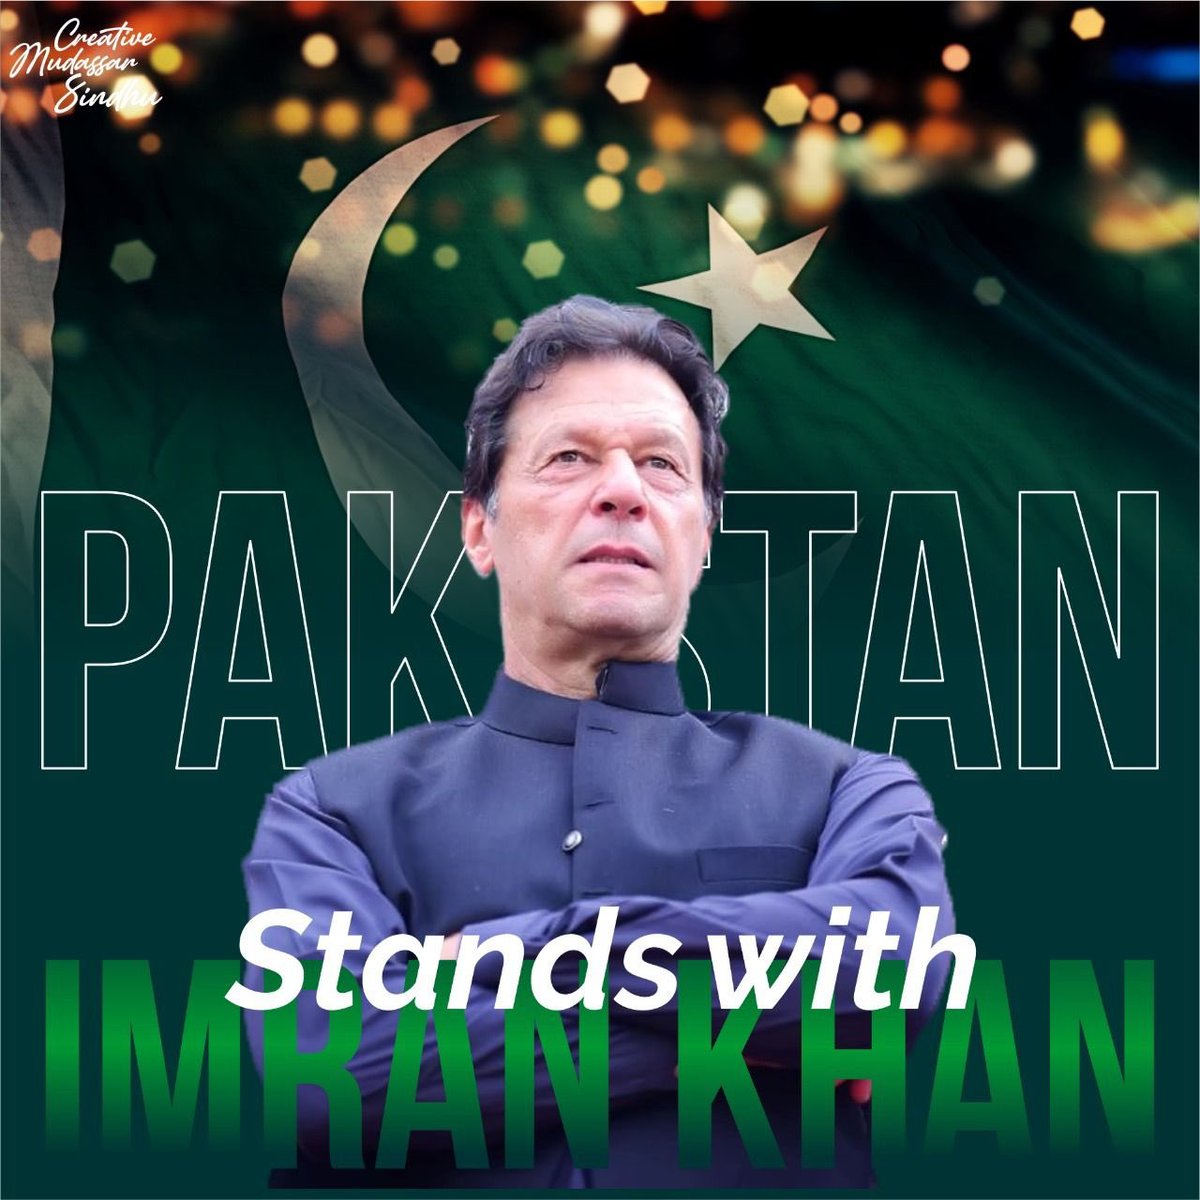 The people of Pakistan were, are and will always stand with Imran Khan. 🇵🇰 #امپورٹڈ_حکومت_نامنظور